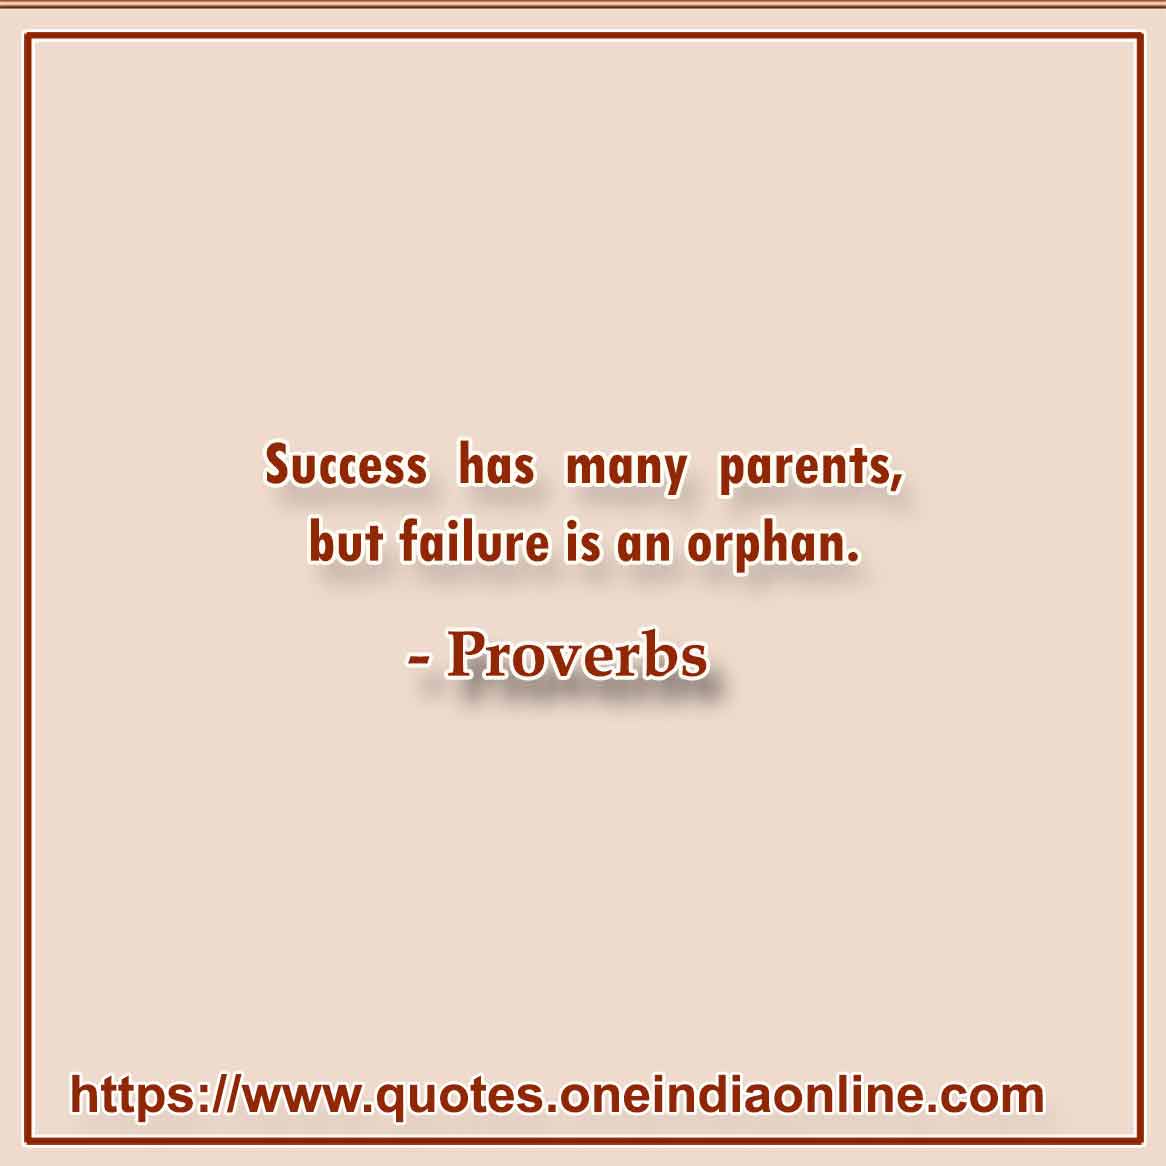 Success has many parents, but failure is an orphan.

- 